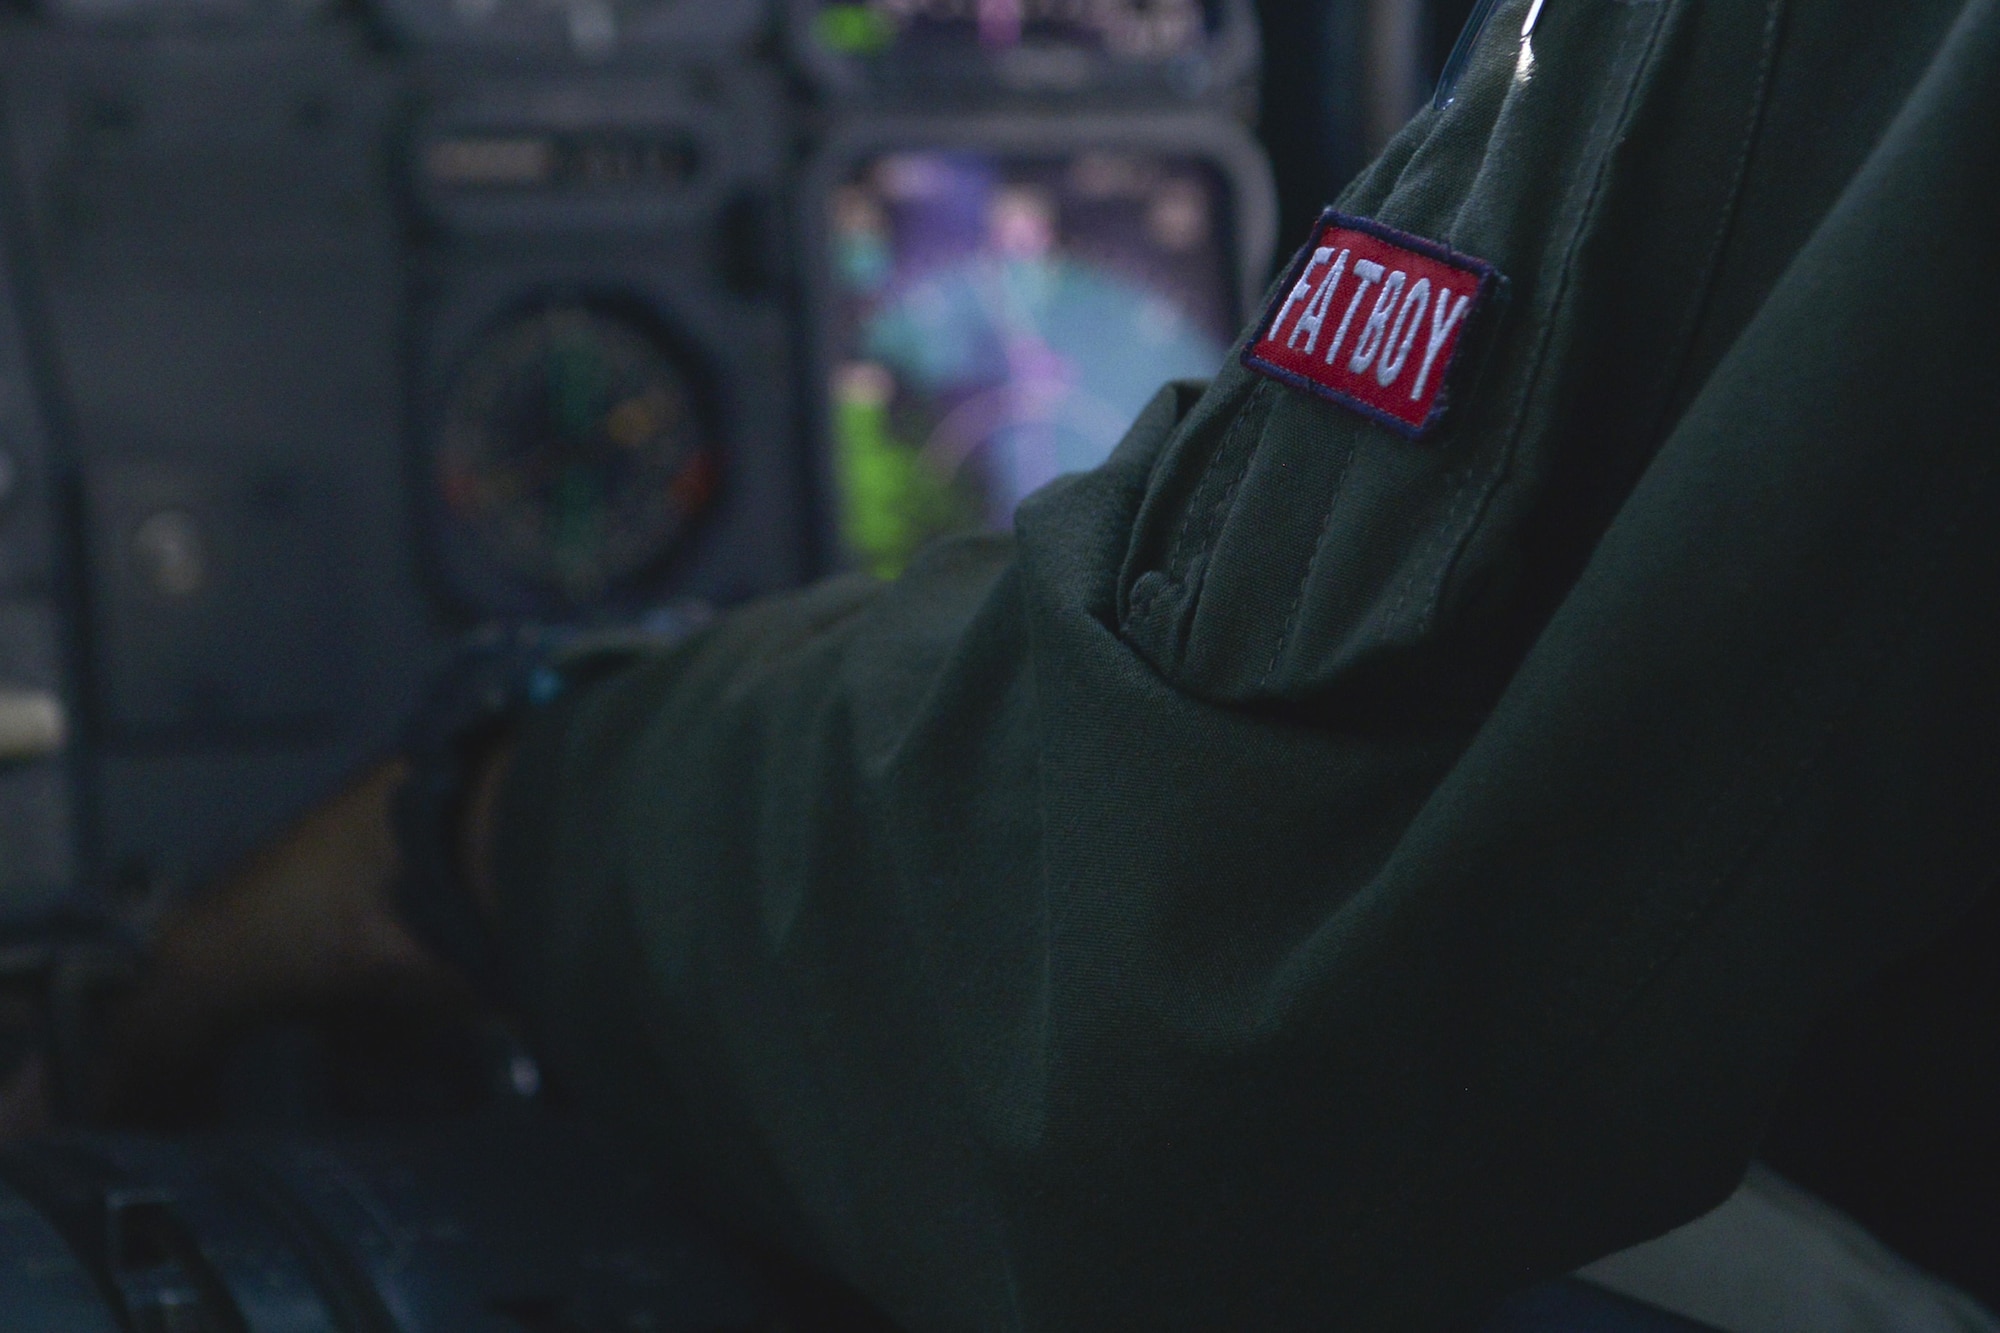 A U.S. Air Force KC-10 Extender pilot dons the “Fat Boy” patch as he supports the F-35A Lightning II’s first transatlantic aerial refueling over the Atlantic Ocean June 30, 2016. “Fat Boy” refers to pilots’ whose first operational aircraft assignment is to fly the KC-10 Extender, which is considered a heavy aircraft due to its size and capabilities. (U.S. Air Force photo by Staff Sgt. Natasha Stannard)